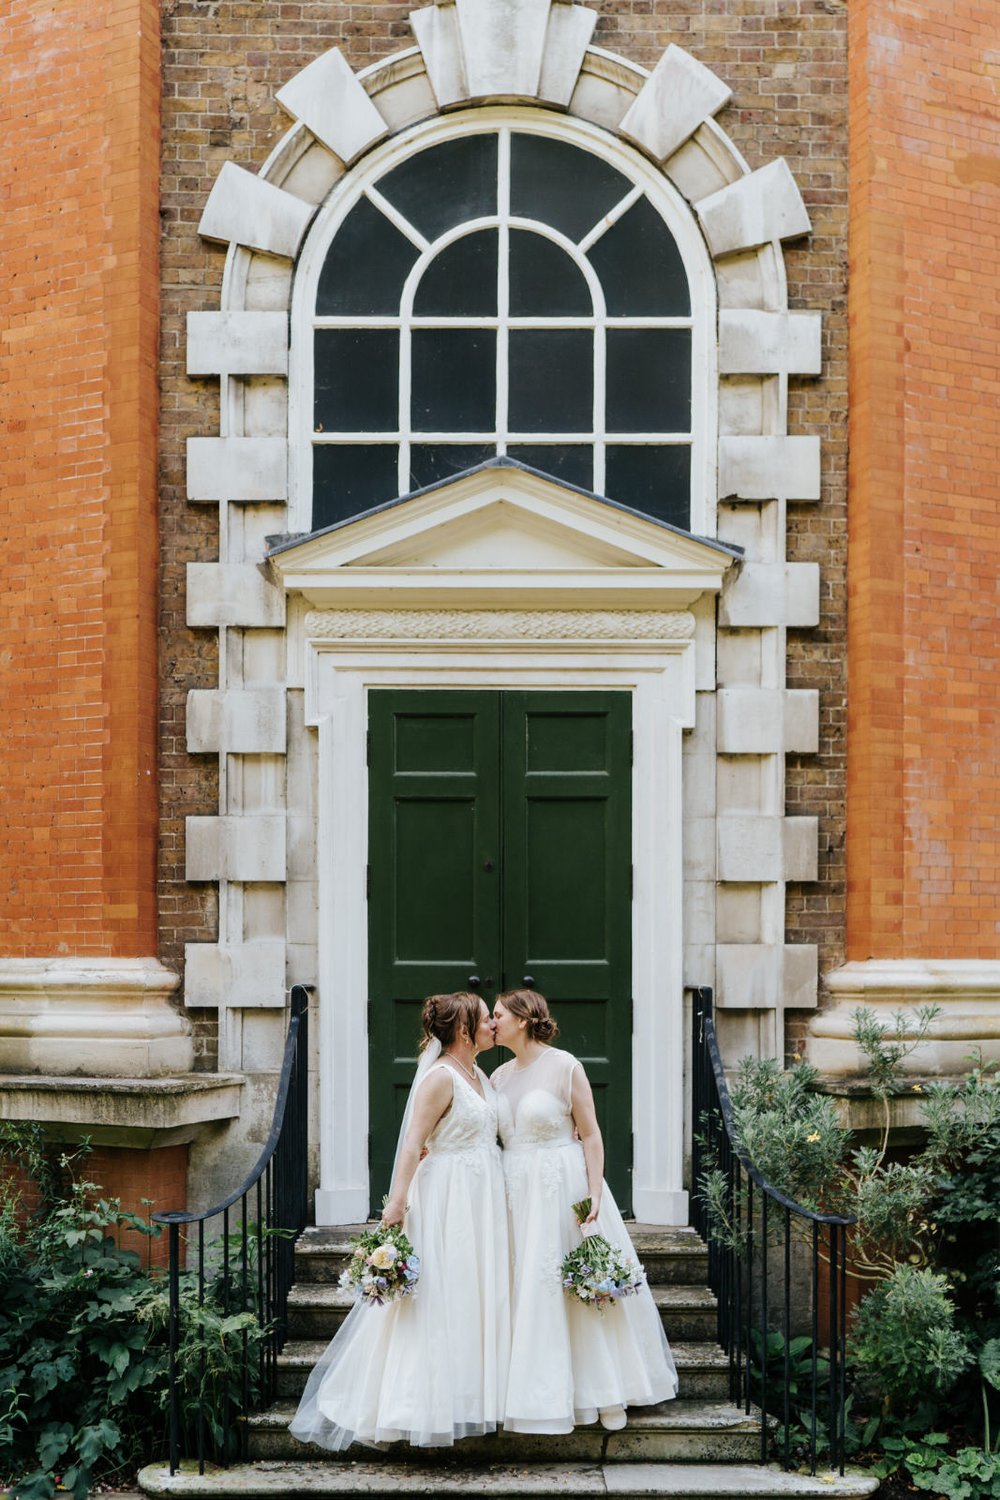 Two brides wearing white wedding dresses pose outside the doors of Orleans House Gallery